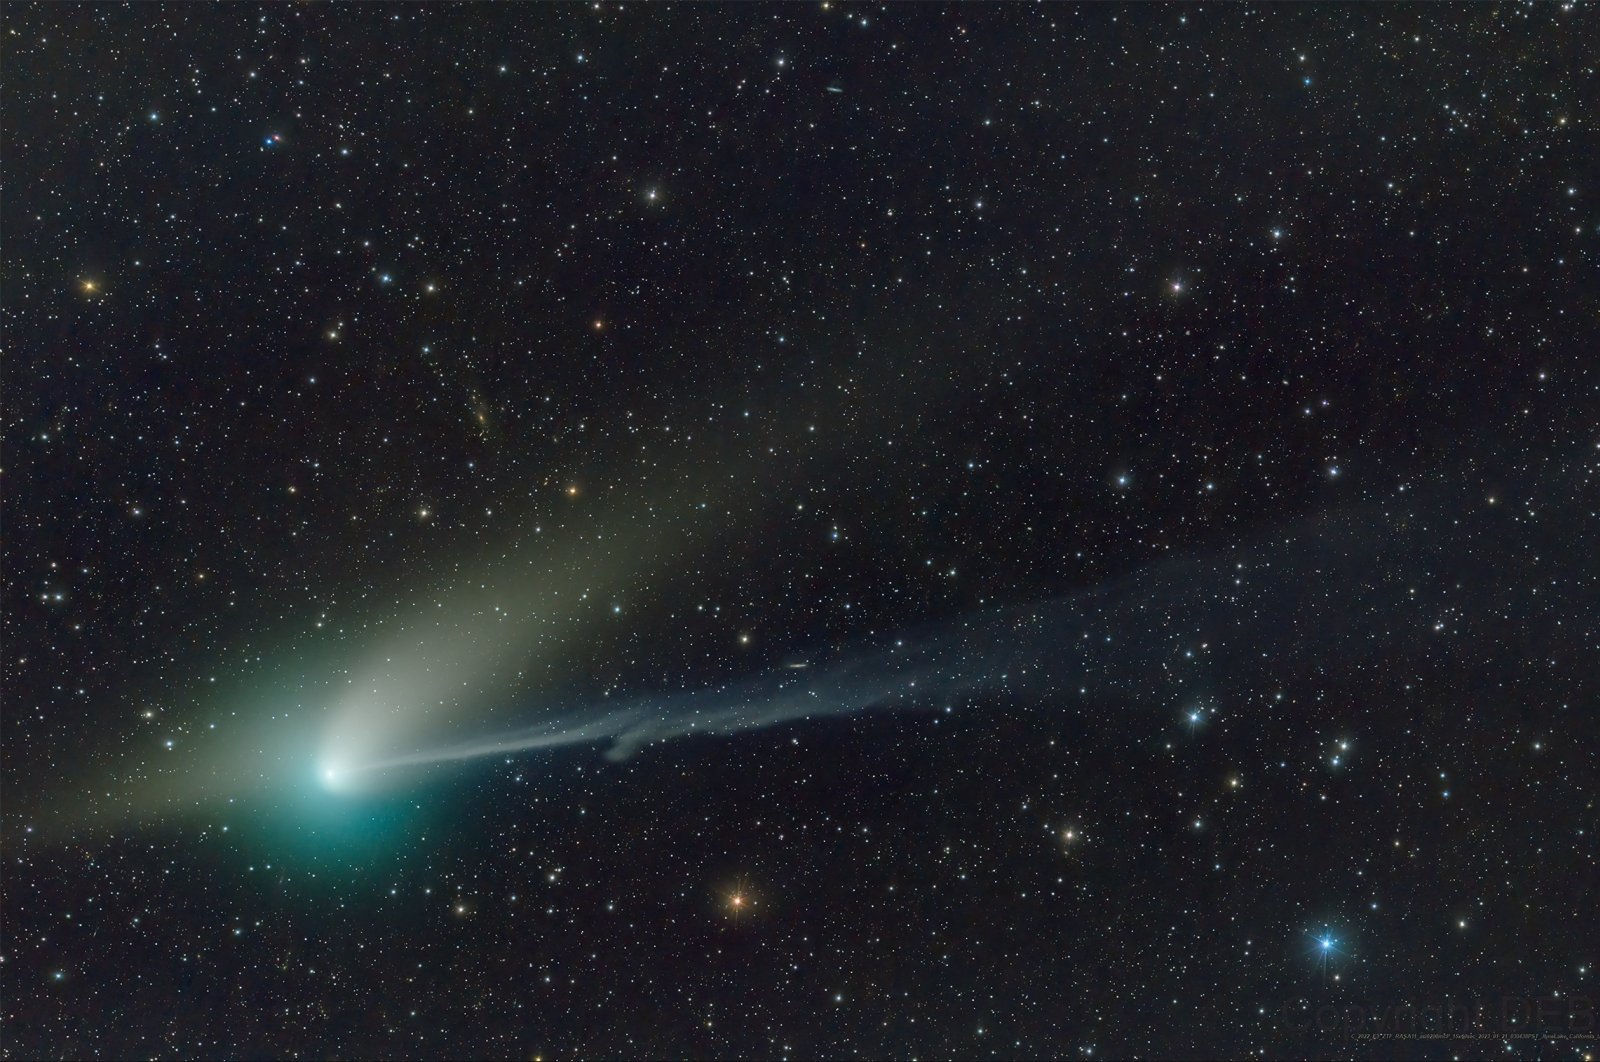 A telescope image shows a green comet named Comet C/2022 E3 (ZTF), which last passed by our planet about 50,000 years ago, Jan. 21, 2023. (Reuters Photo)